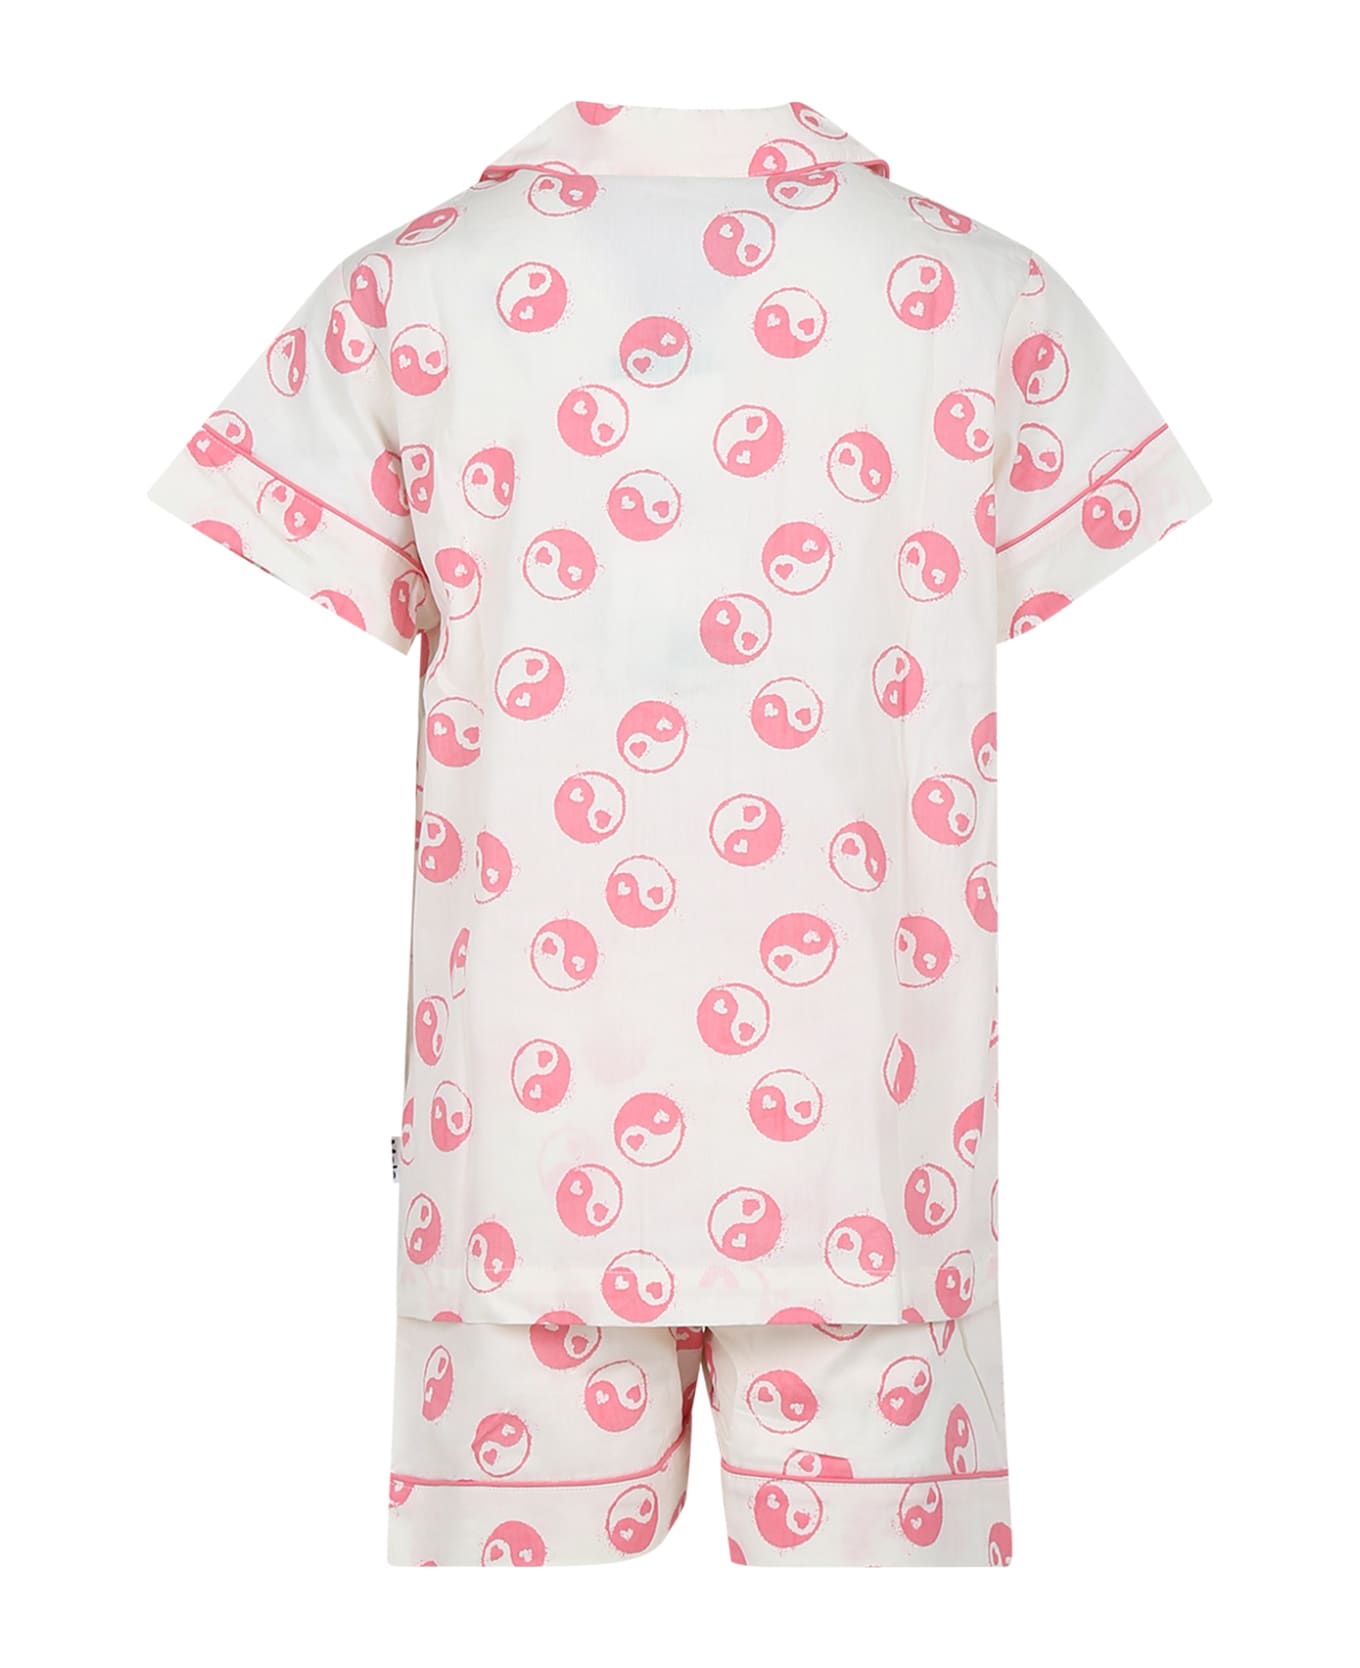 Molo White Pajamas For Kids With Smiley - Pink